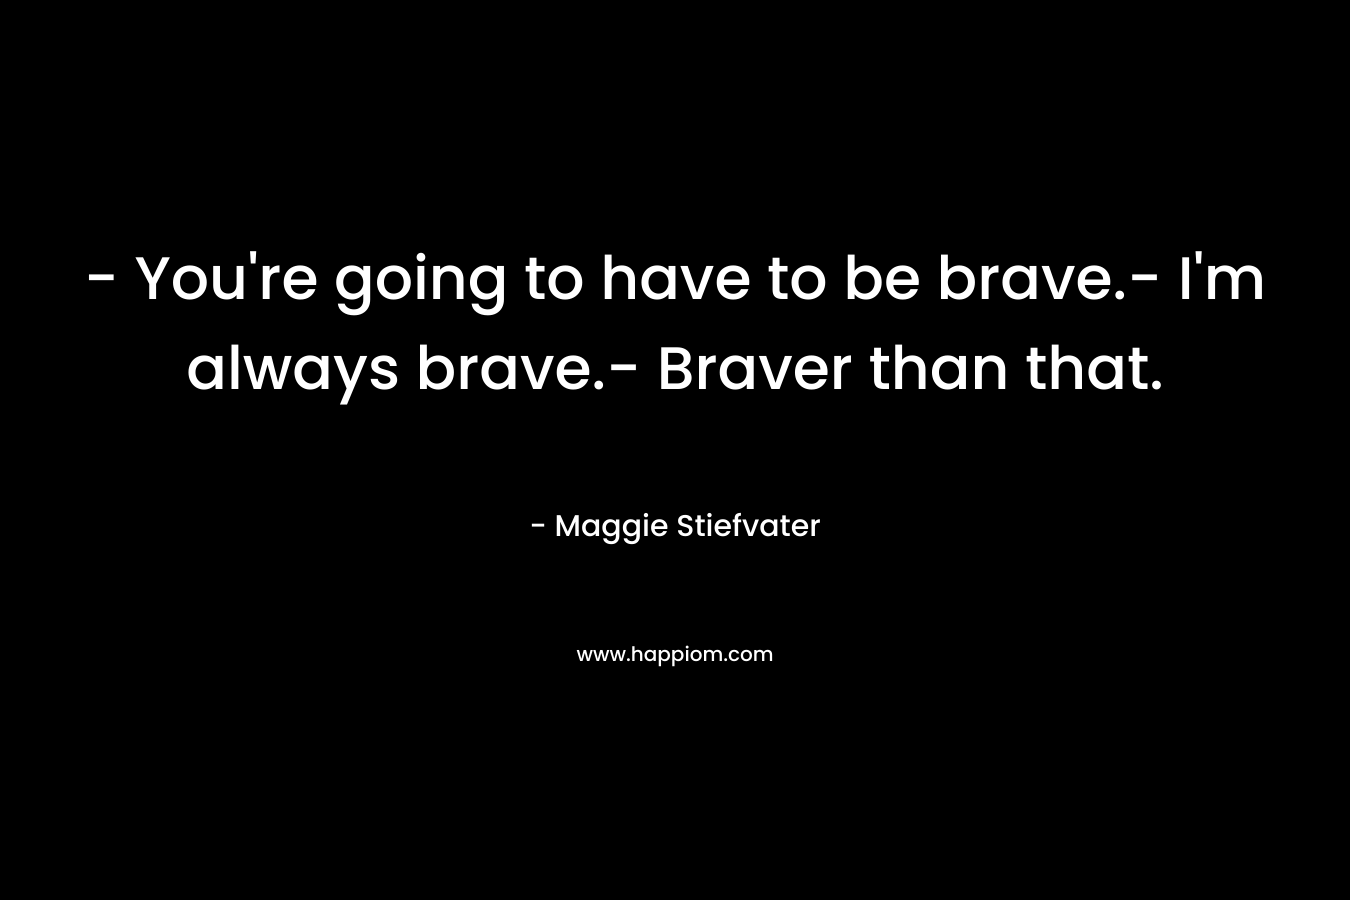 – You’re going to have to be brave.- I’m always brave.- Braver than that. – Maggie Stiefvater